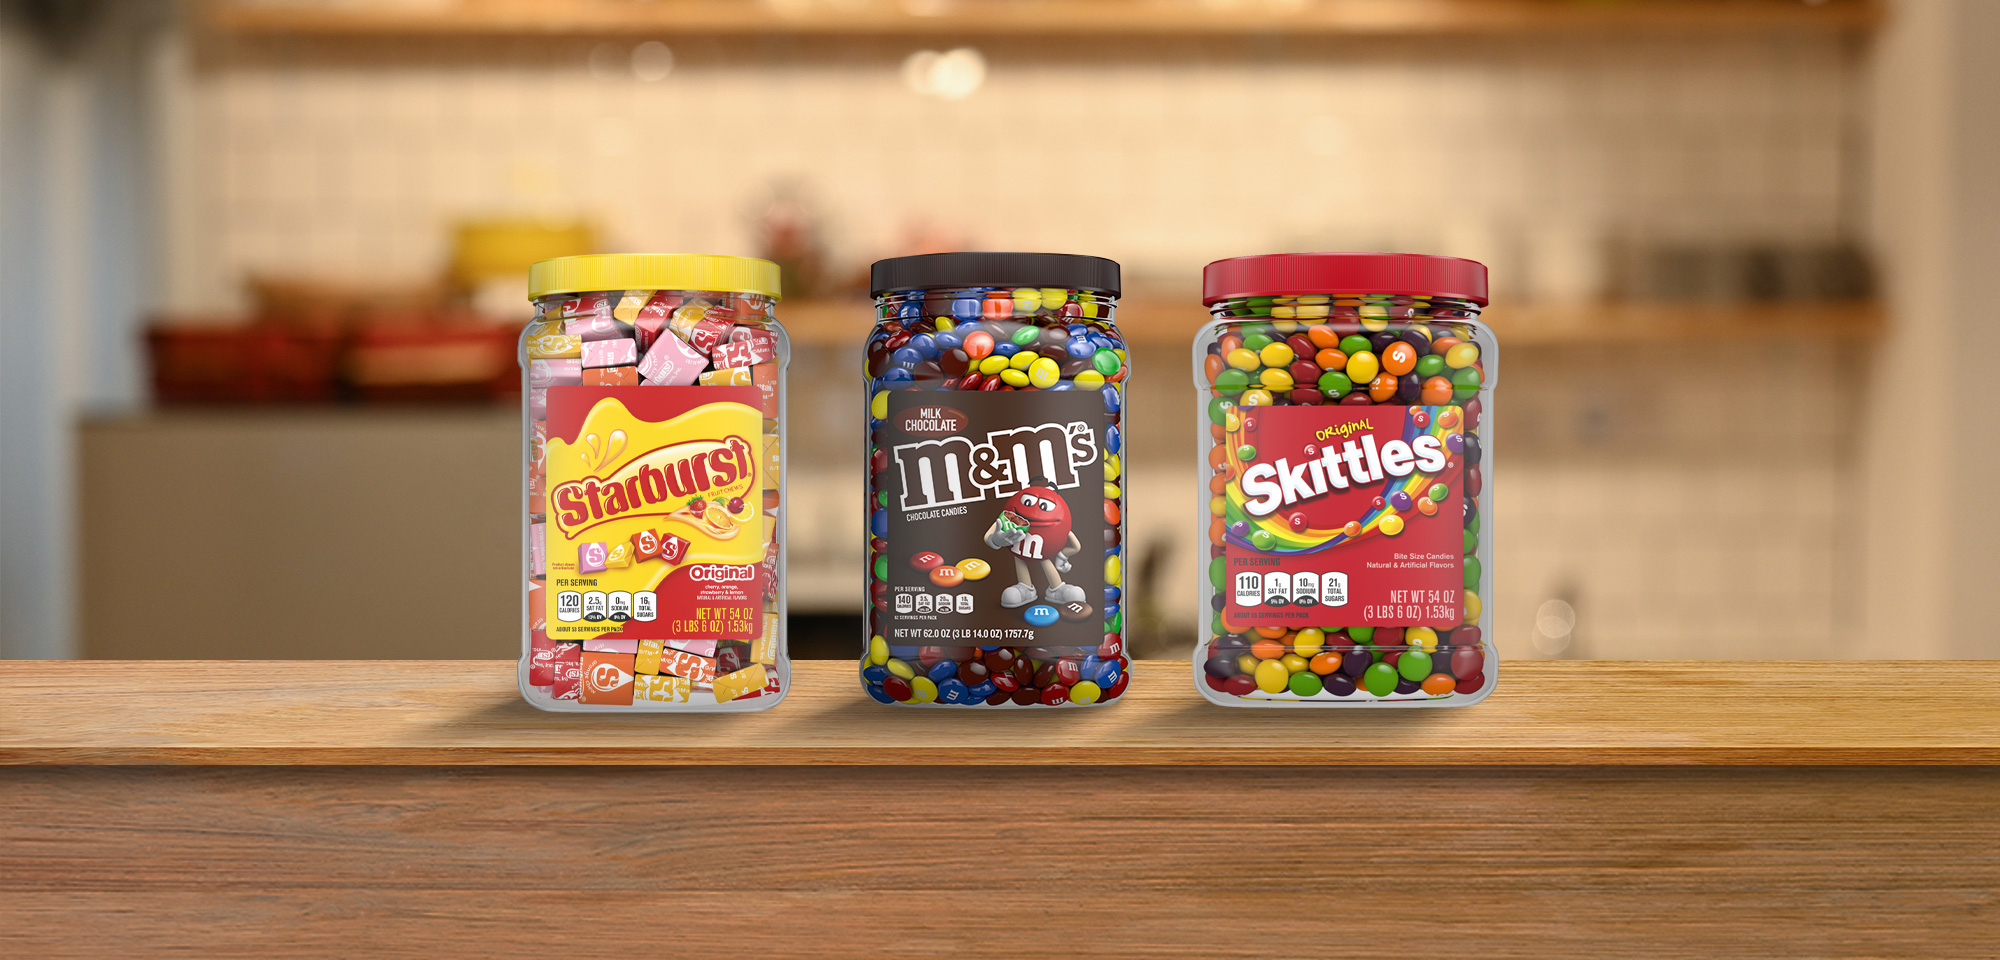 M&M's confectionery brand launches major global social inclusion